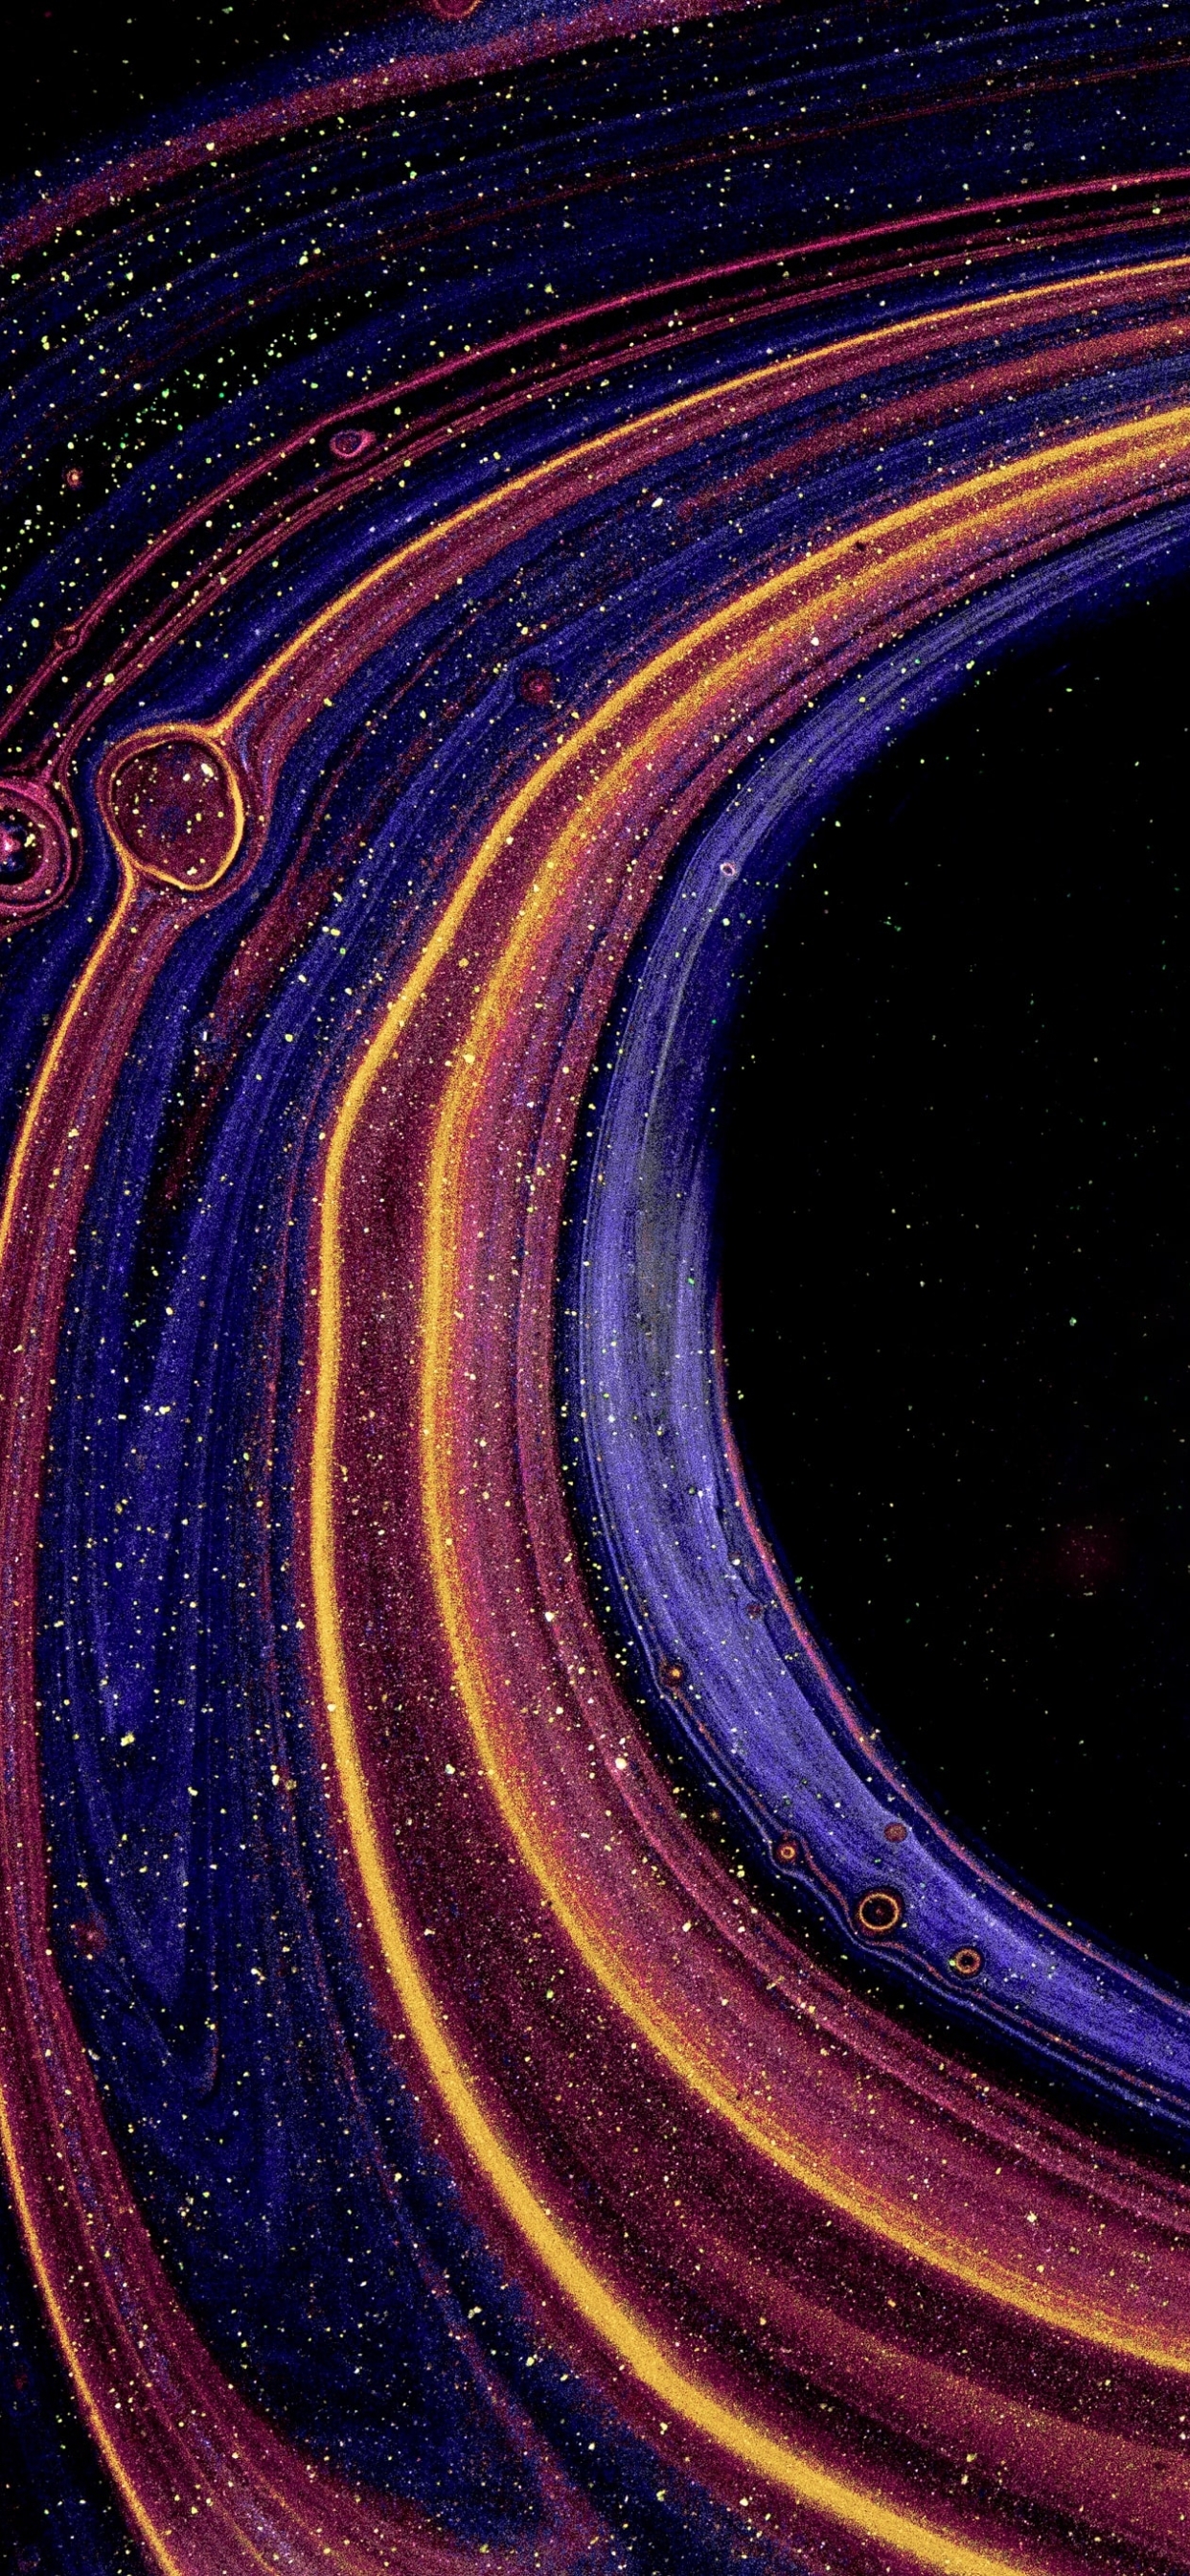 Abstract space neon wallpaper - pling.com